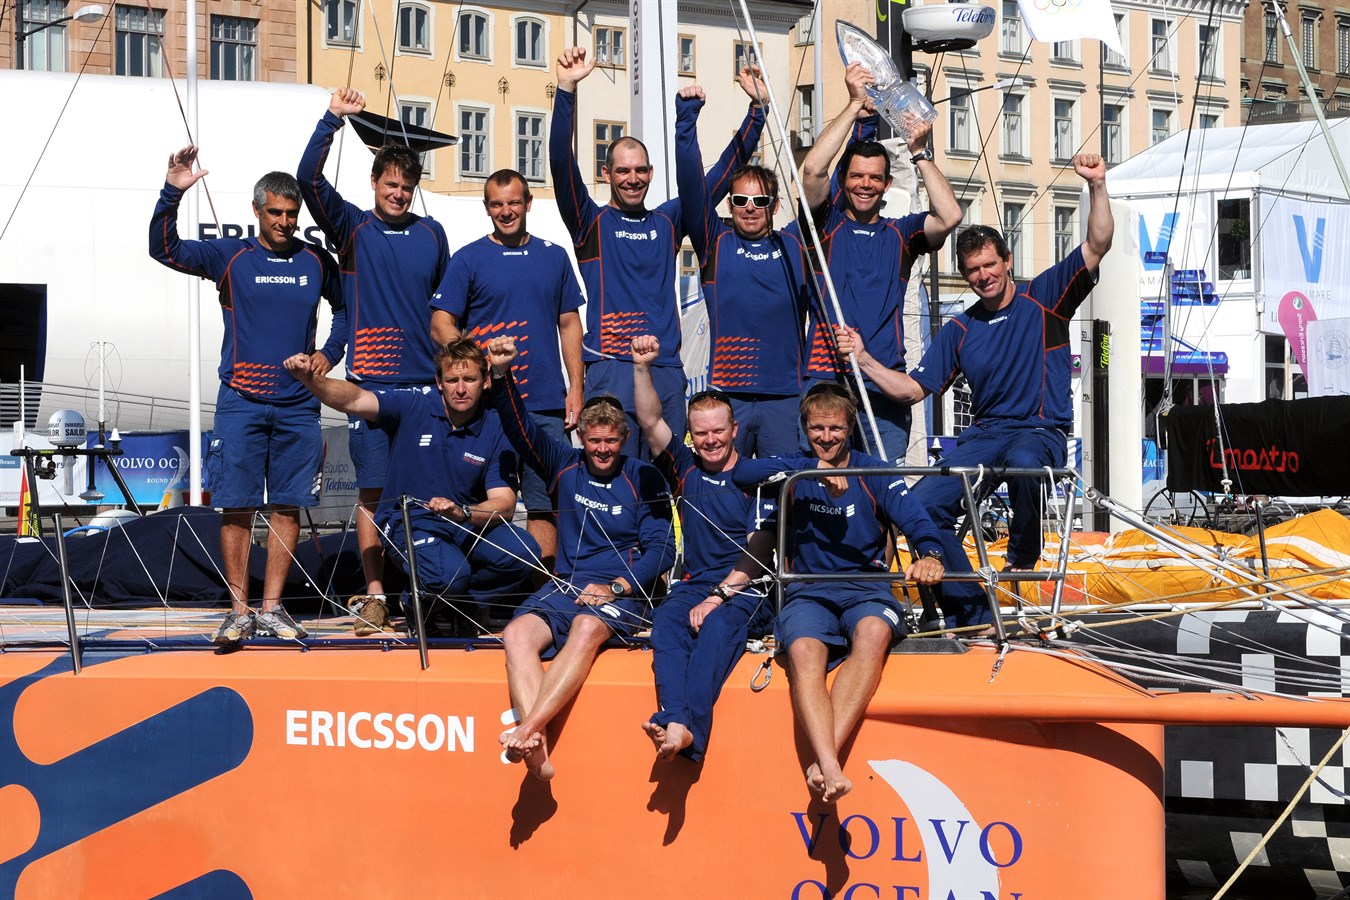 Winners of the Volvo Ocean Race 2008-09, Ericsson 4, skippered by Torben Grael (BRA) are presented the Fighting Finish trophy